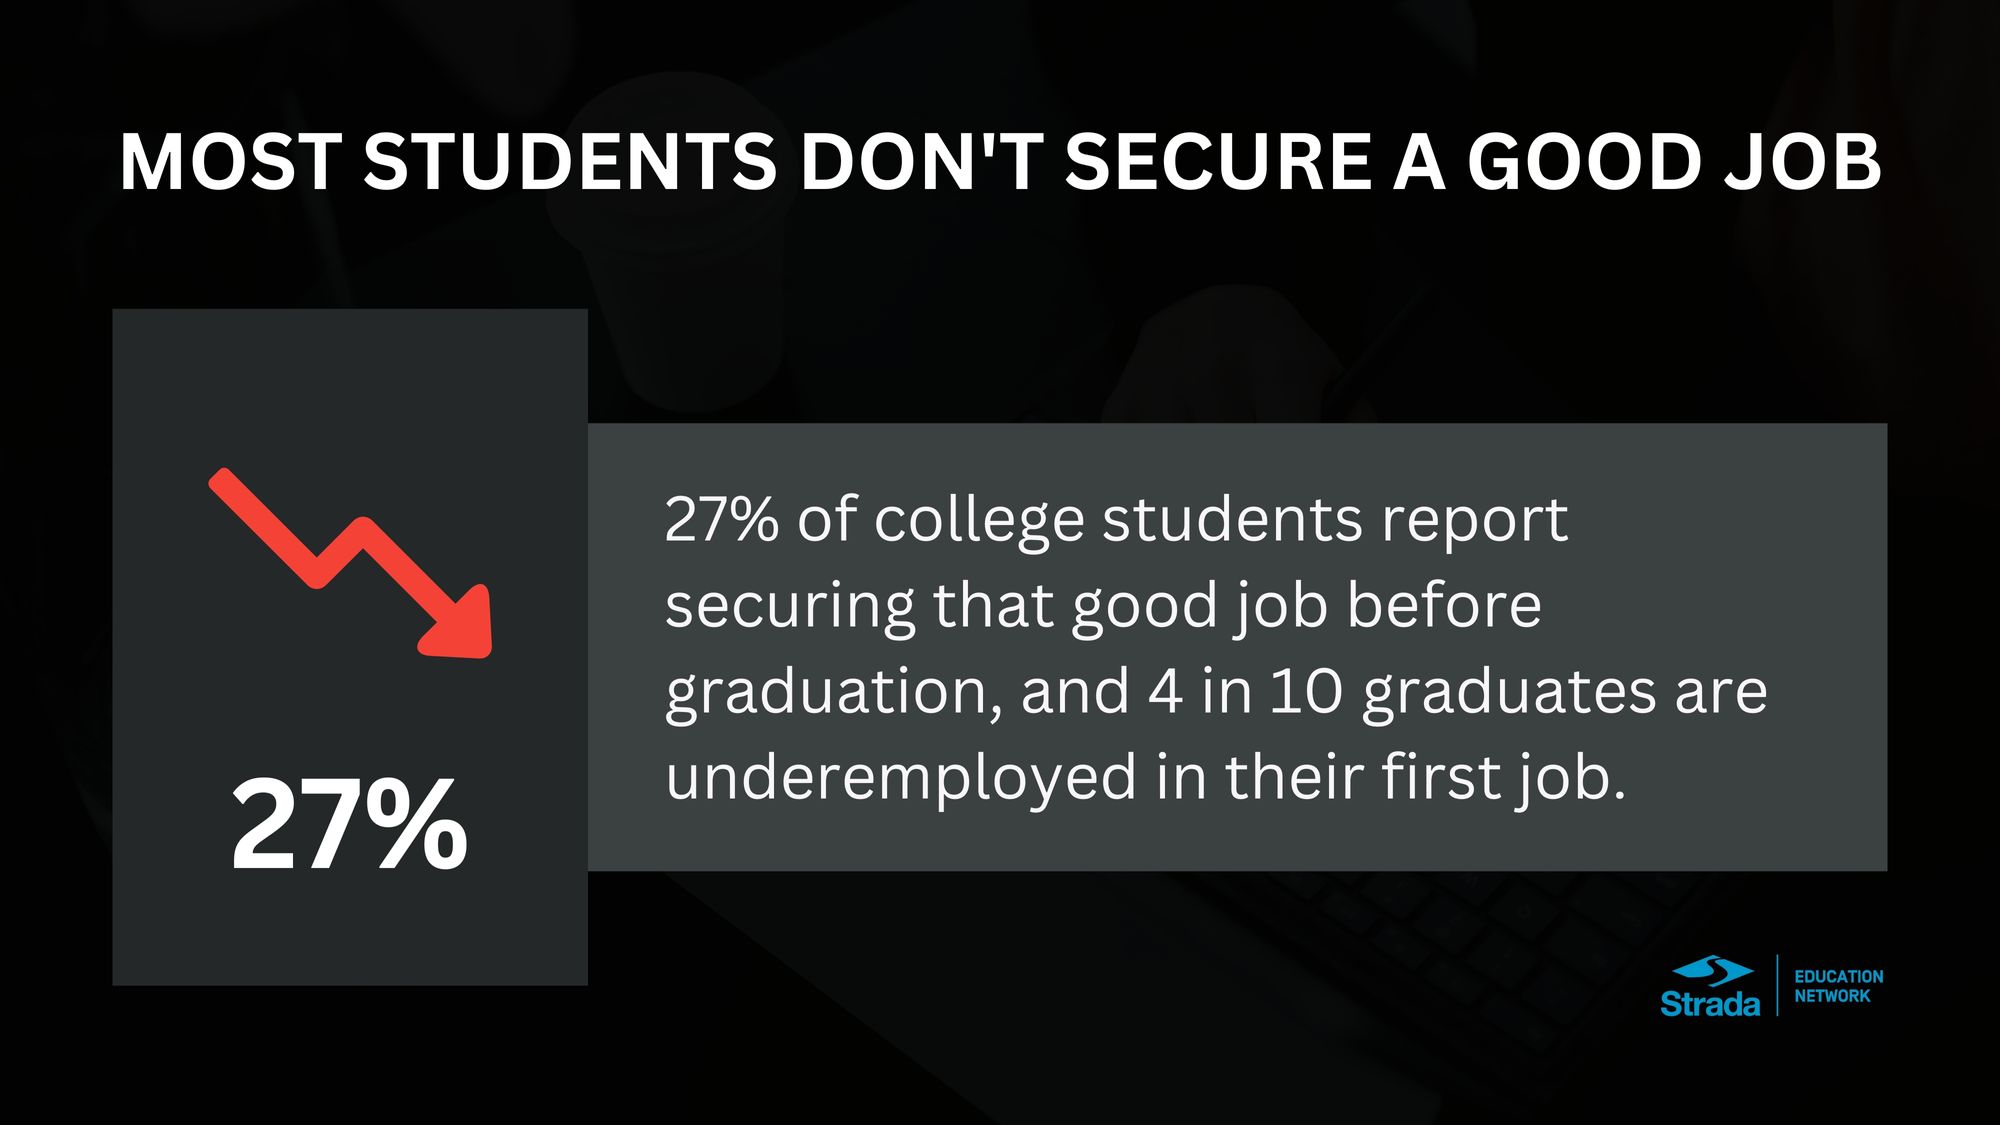 Infographic showing 27% of students report securing a good jo before graduation.